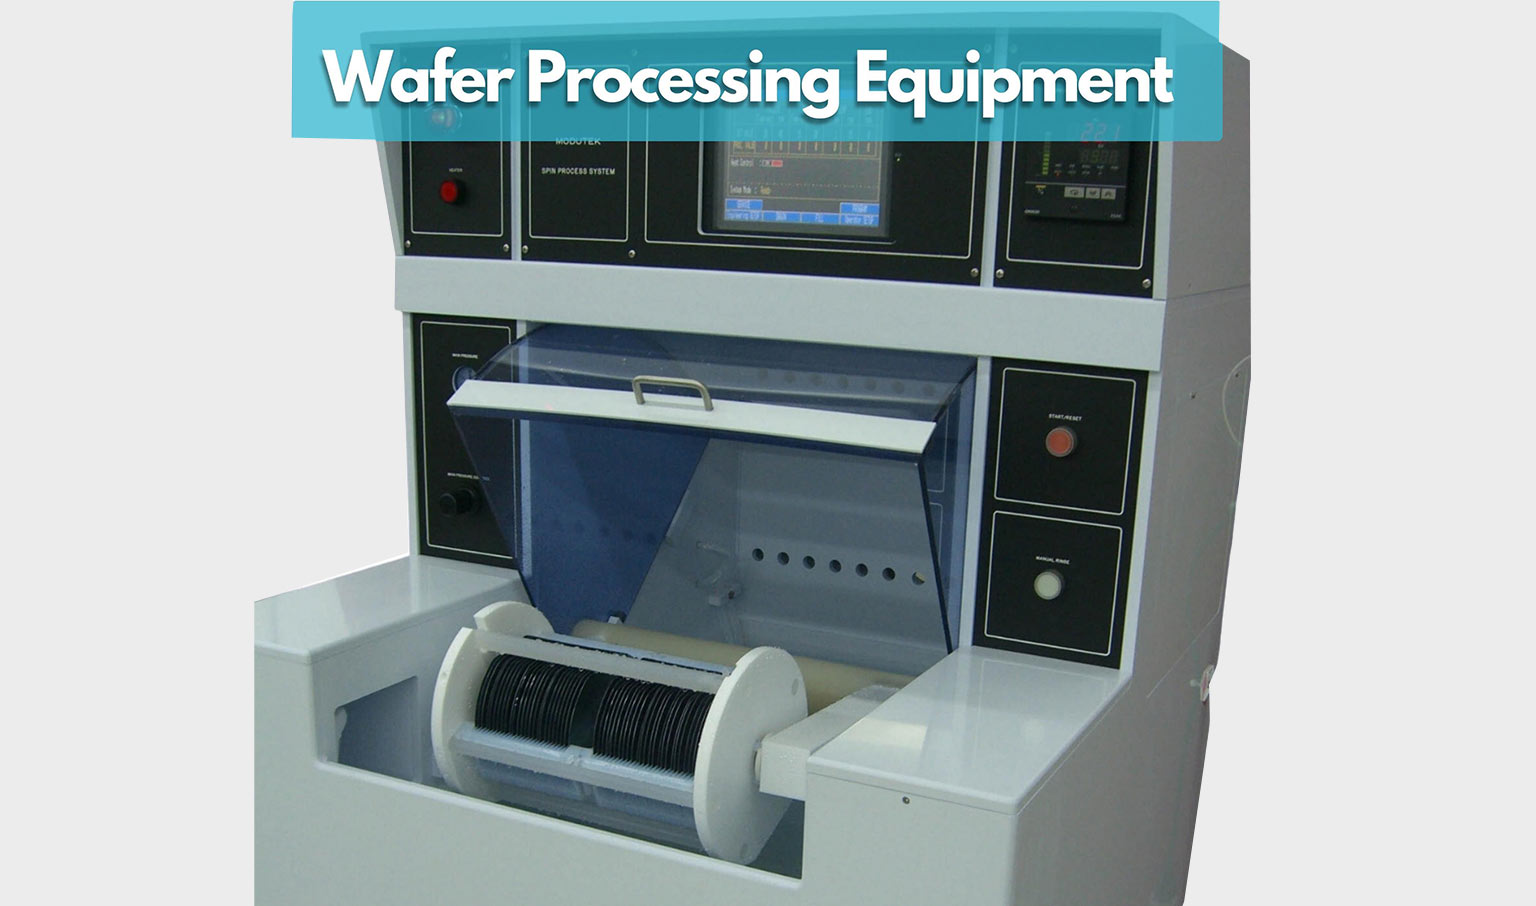 Wafer-Processing-Equipment